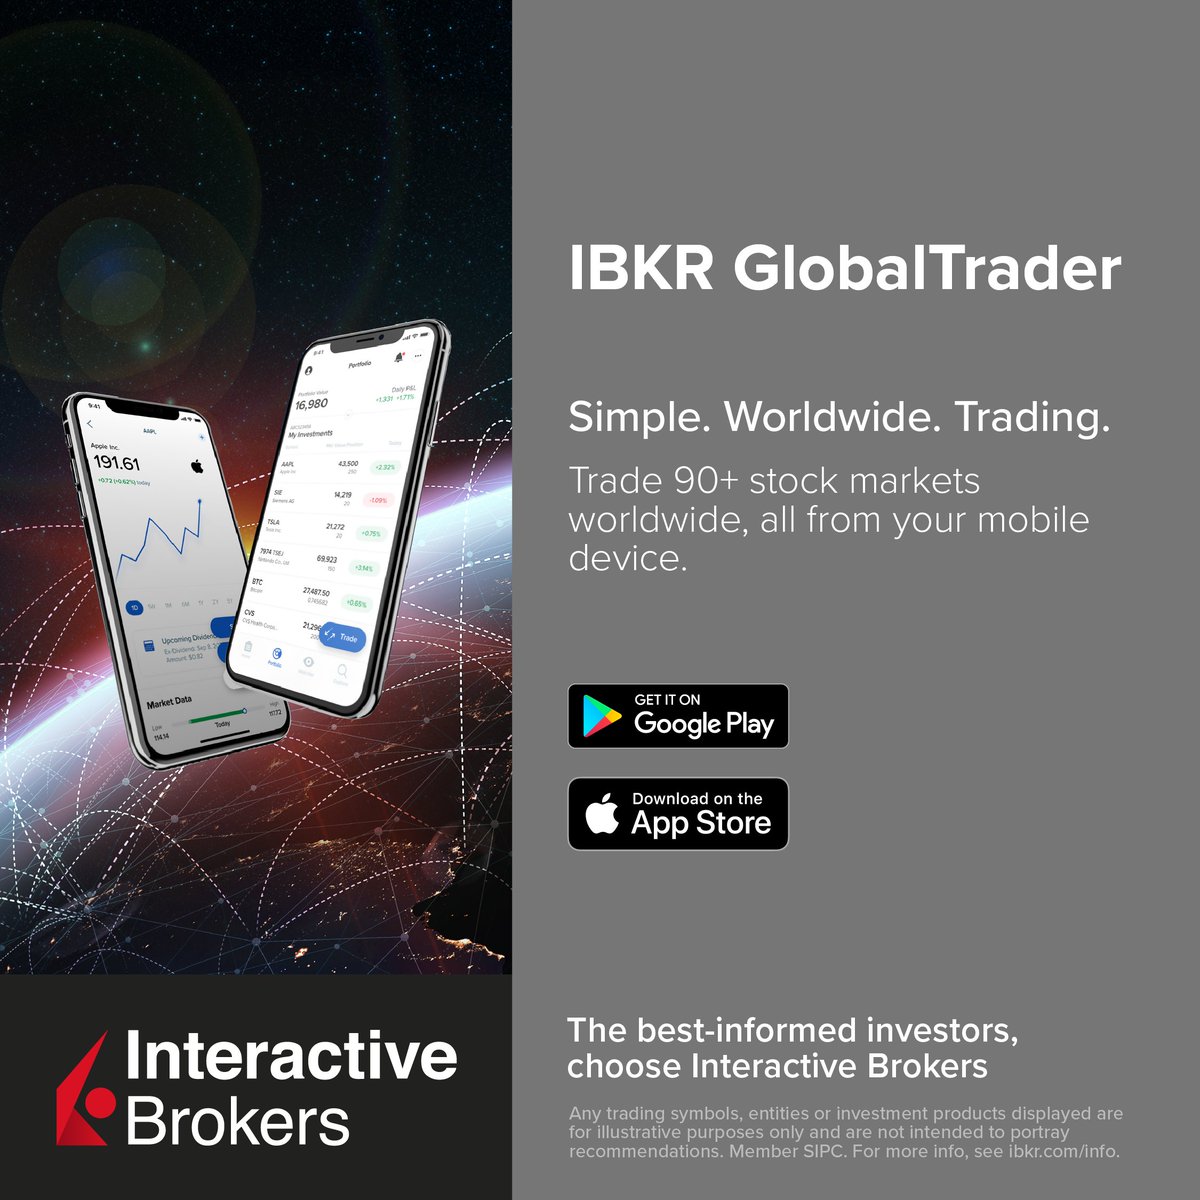 With #IBKR GlobalTrader you can put the world in the palm of your hand by accessing 90+ #stockmarkets worldwide. Download the app today: spr.ly/globaltradert